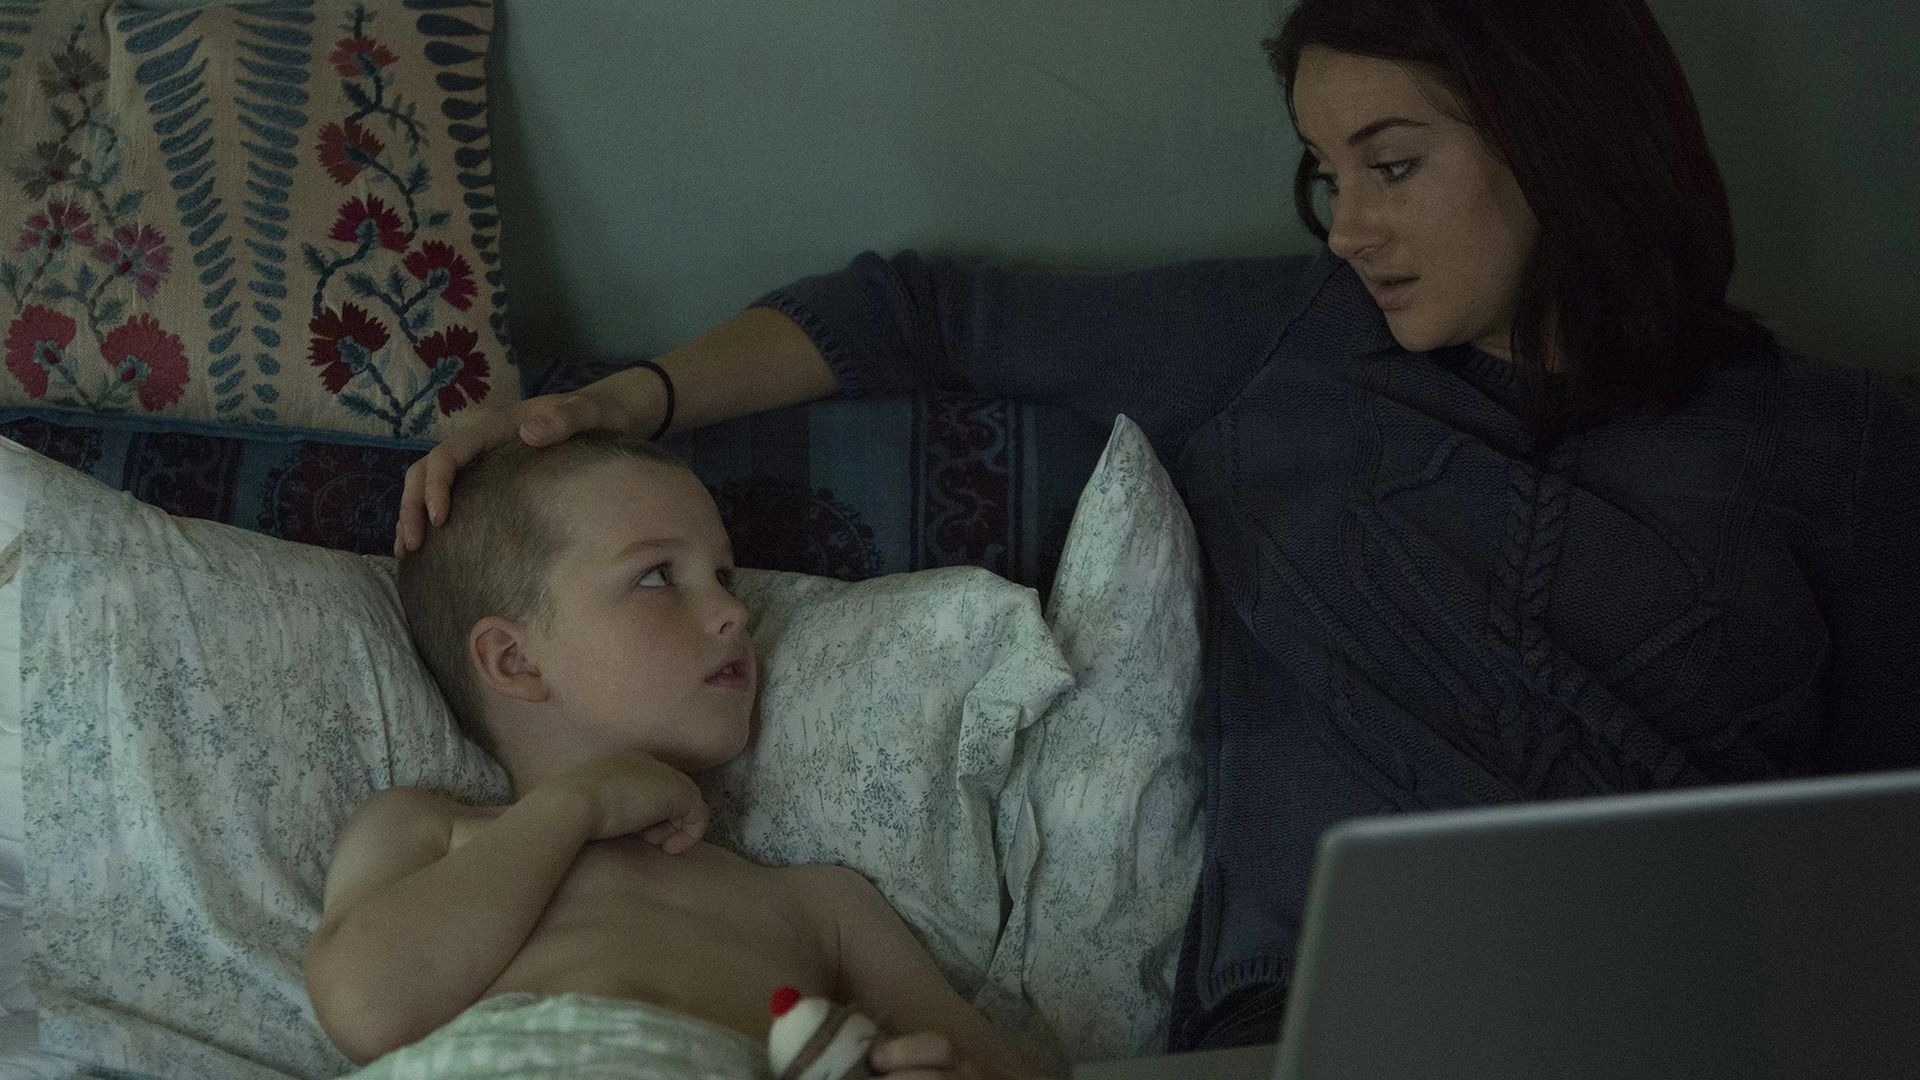 Iain Armitage in the series 'Big Little Lies'